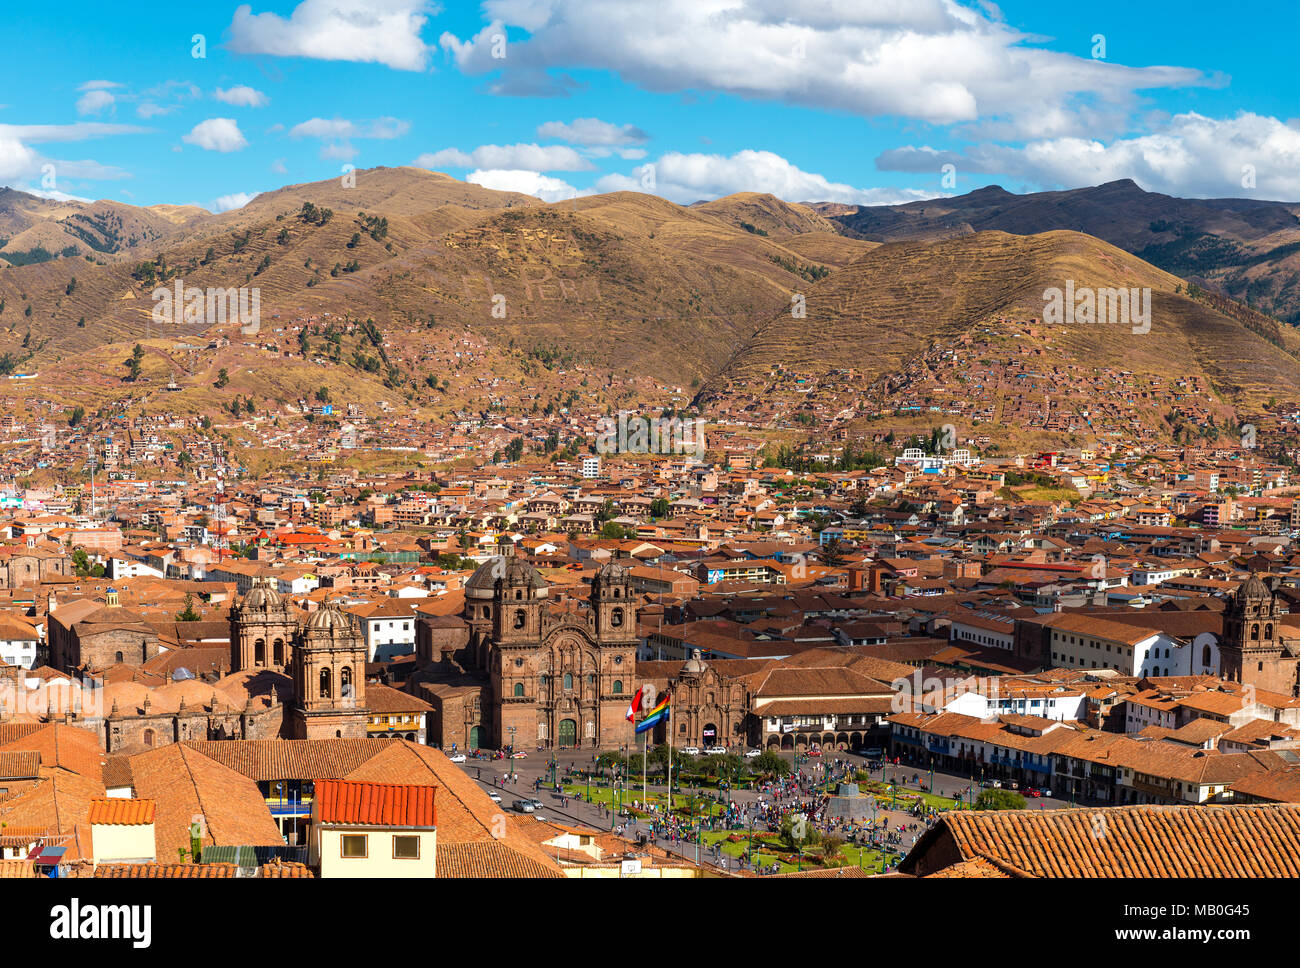 The urban skyline of Cusco city during daytime with the Plaza de Armas and cathedral and the Andes mountain range in the background, Peru. Stock Photo